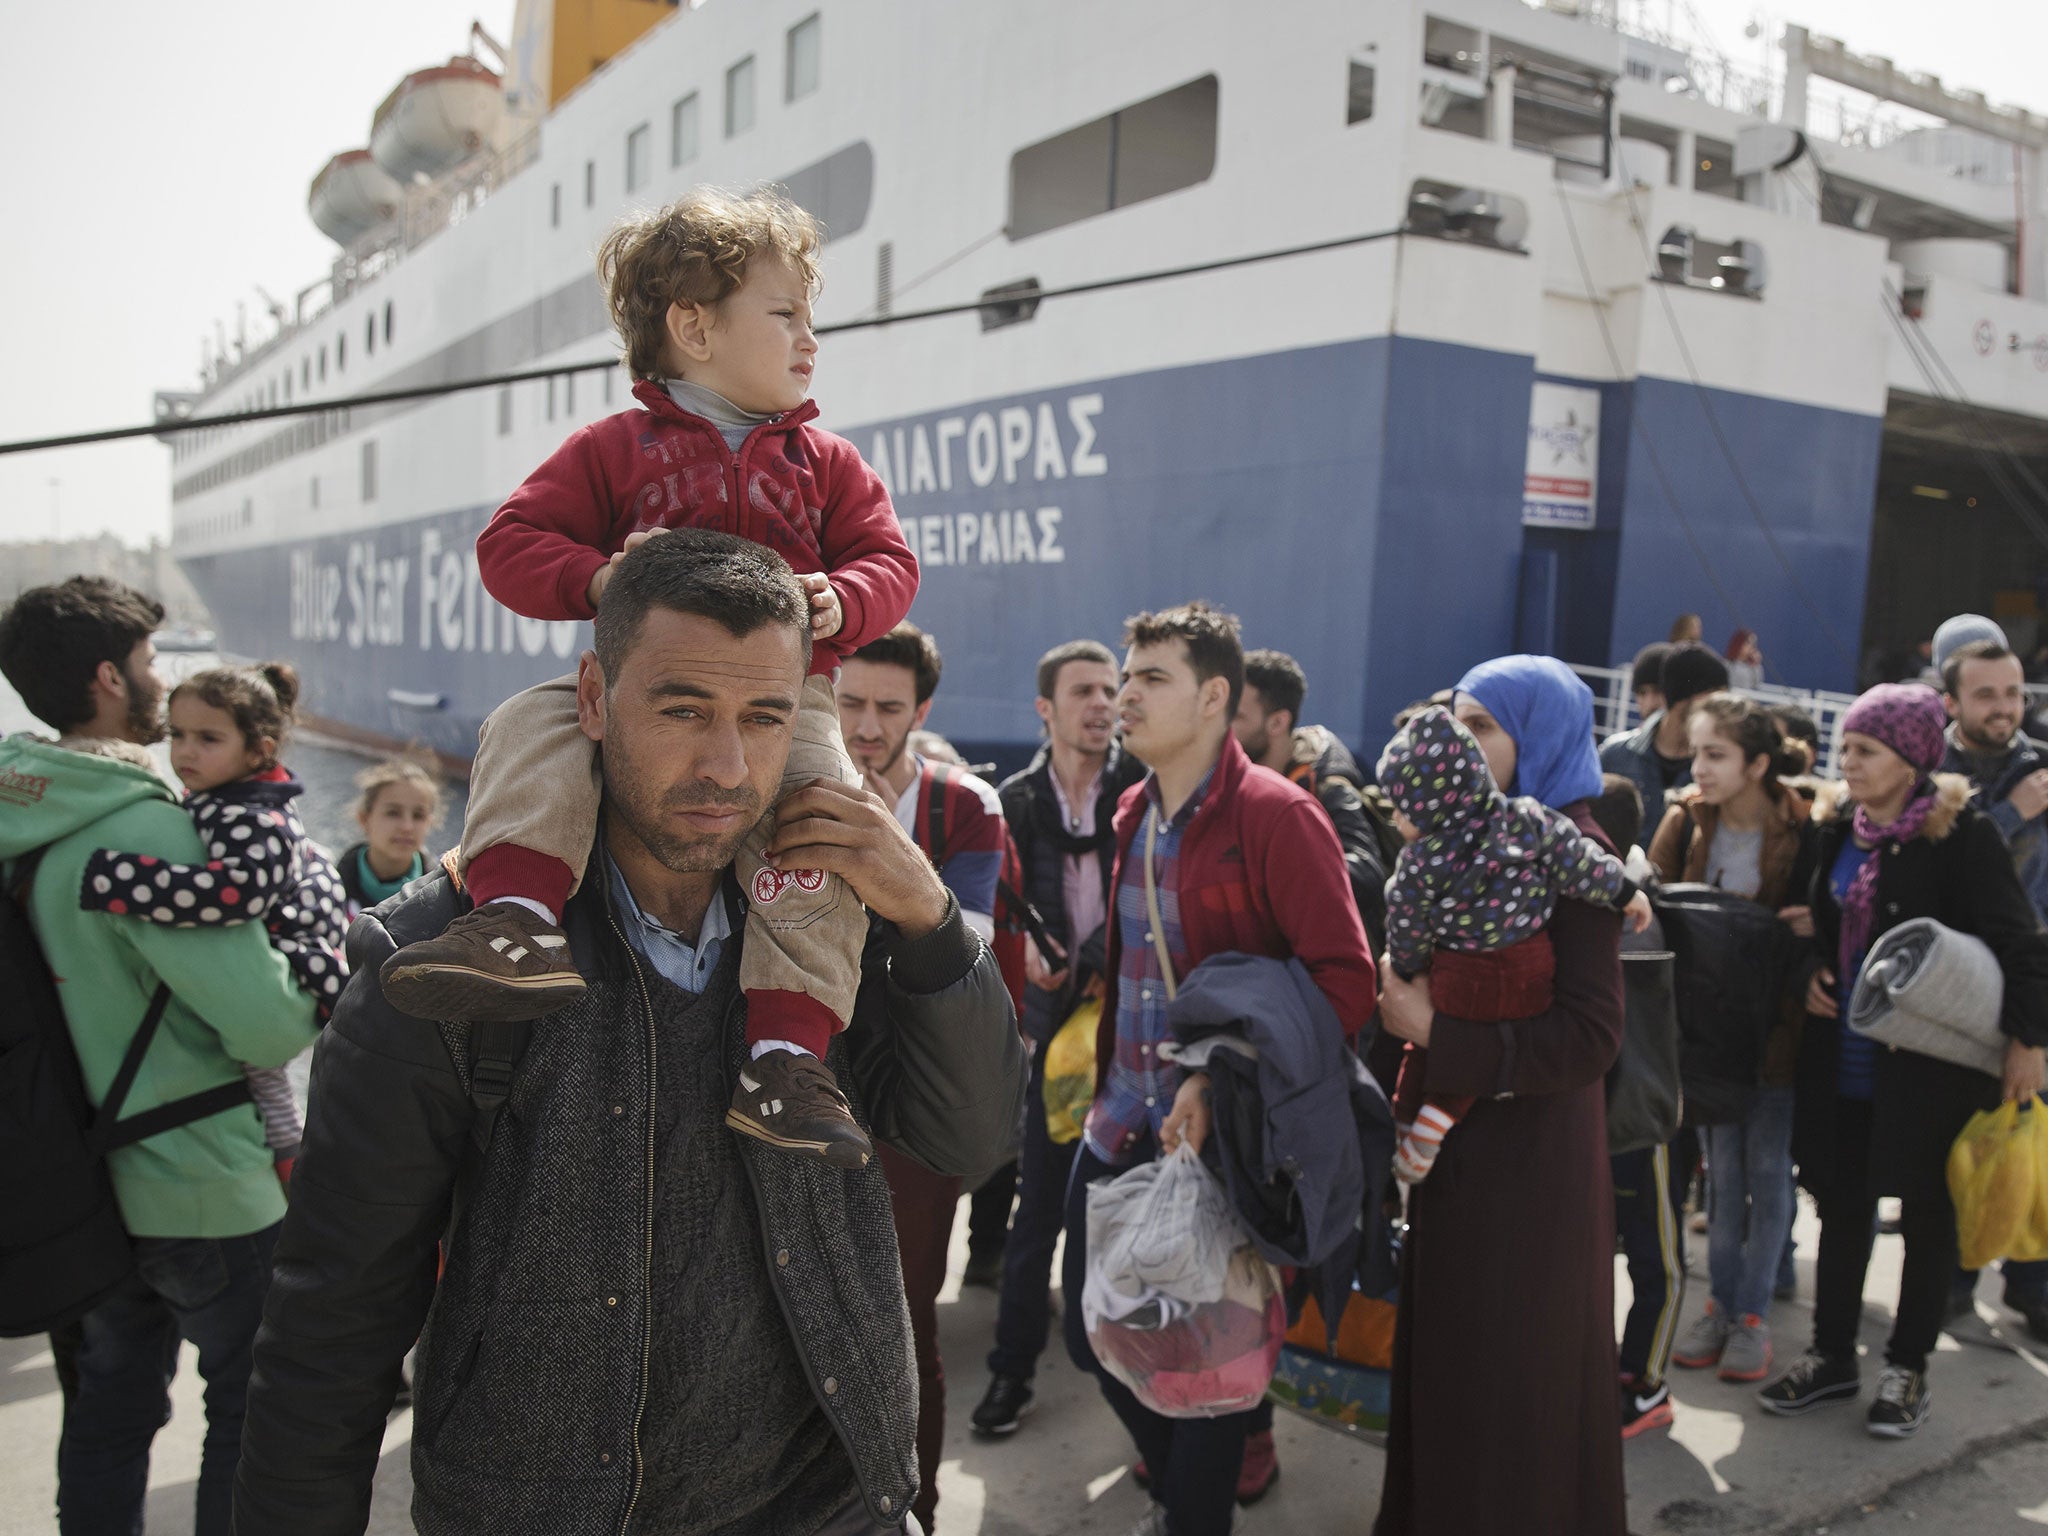 Refugees and migrants disembark from a ferry coming from Lesvos island, in the port of Piraeus, Greece, 01 March 2016.